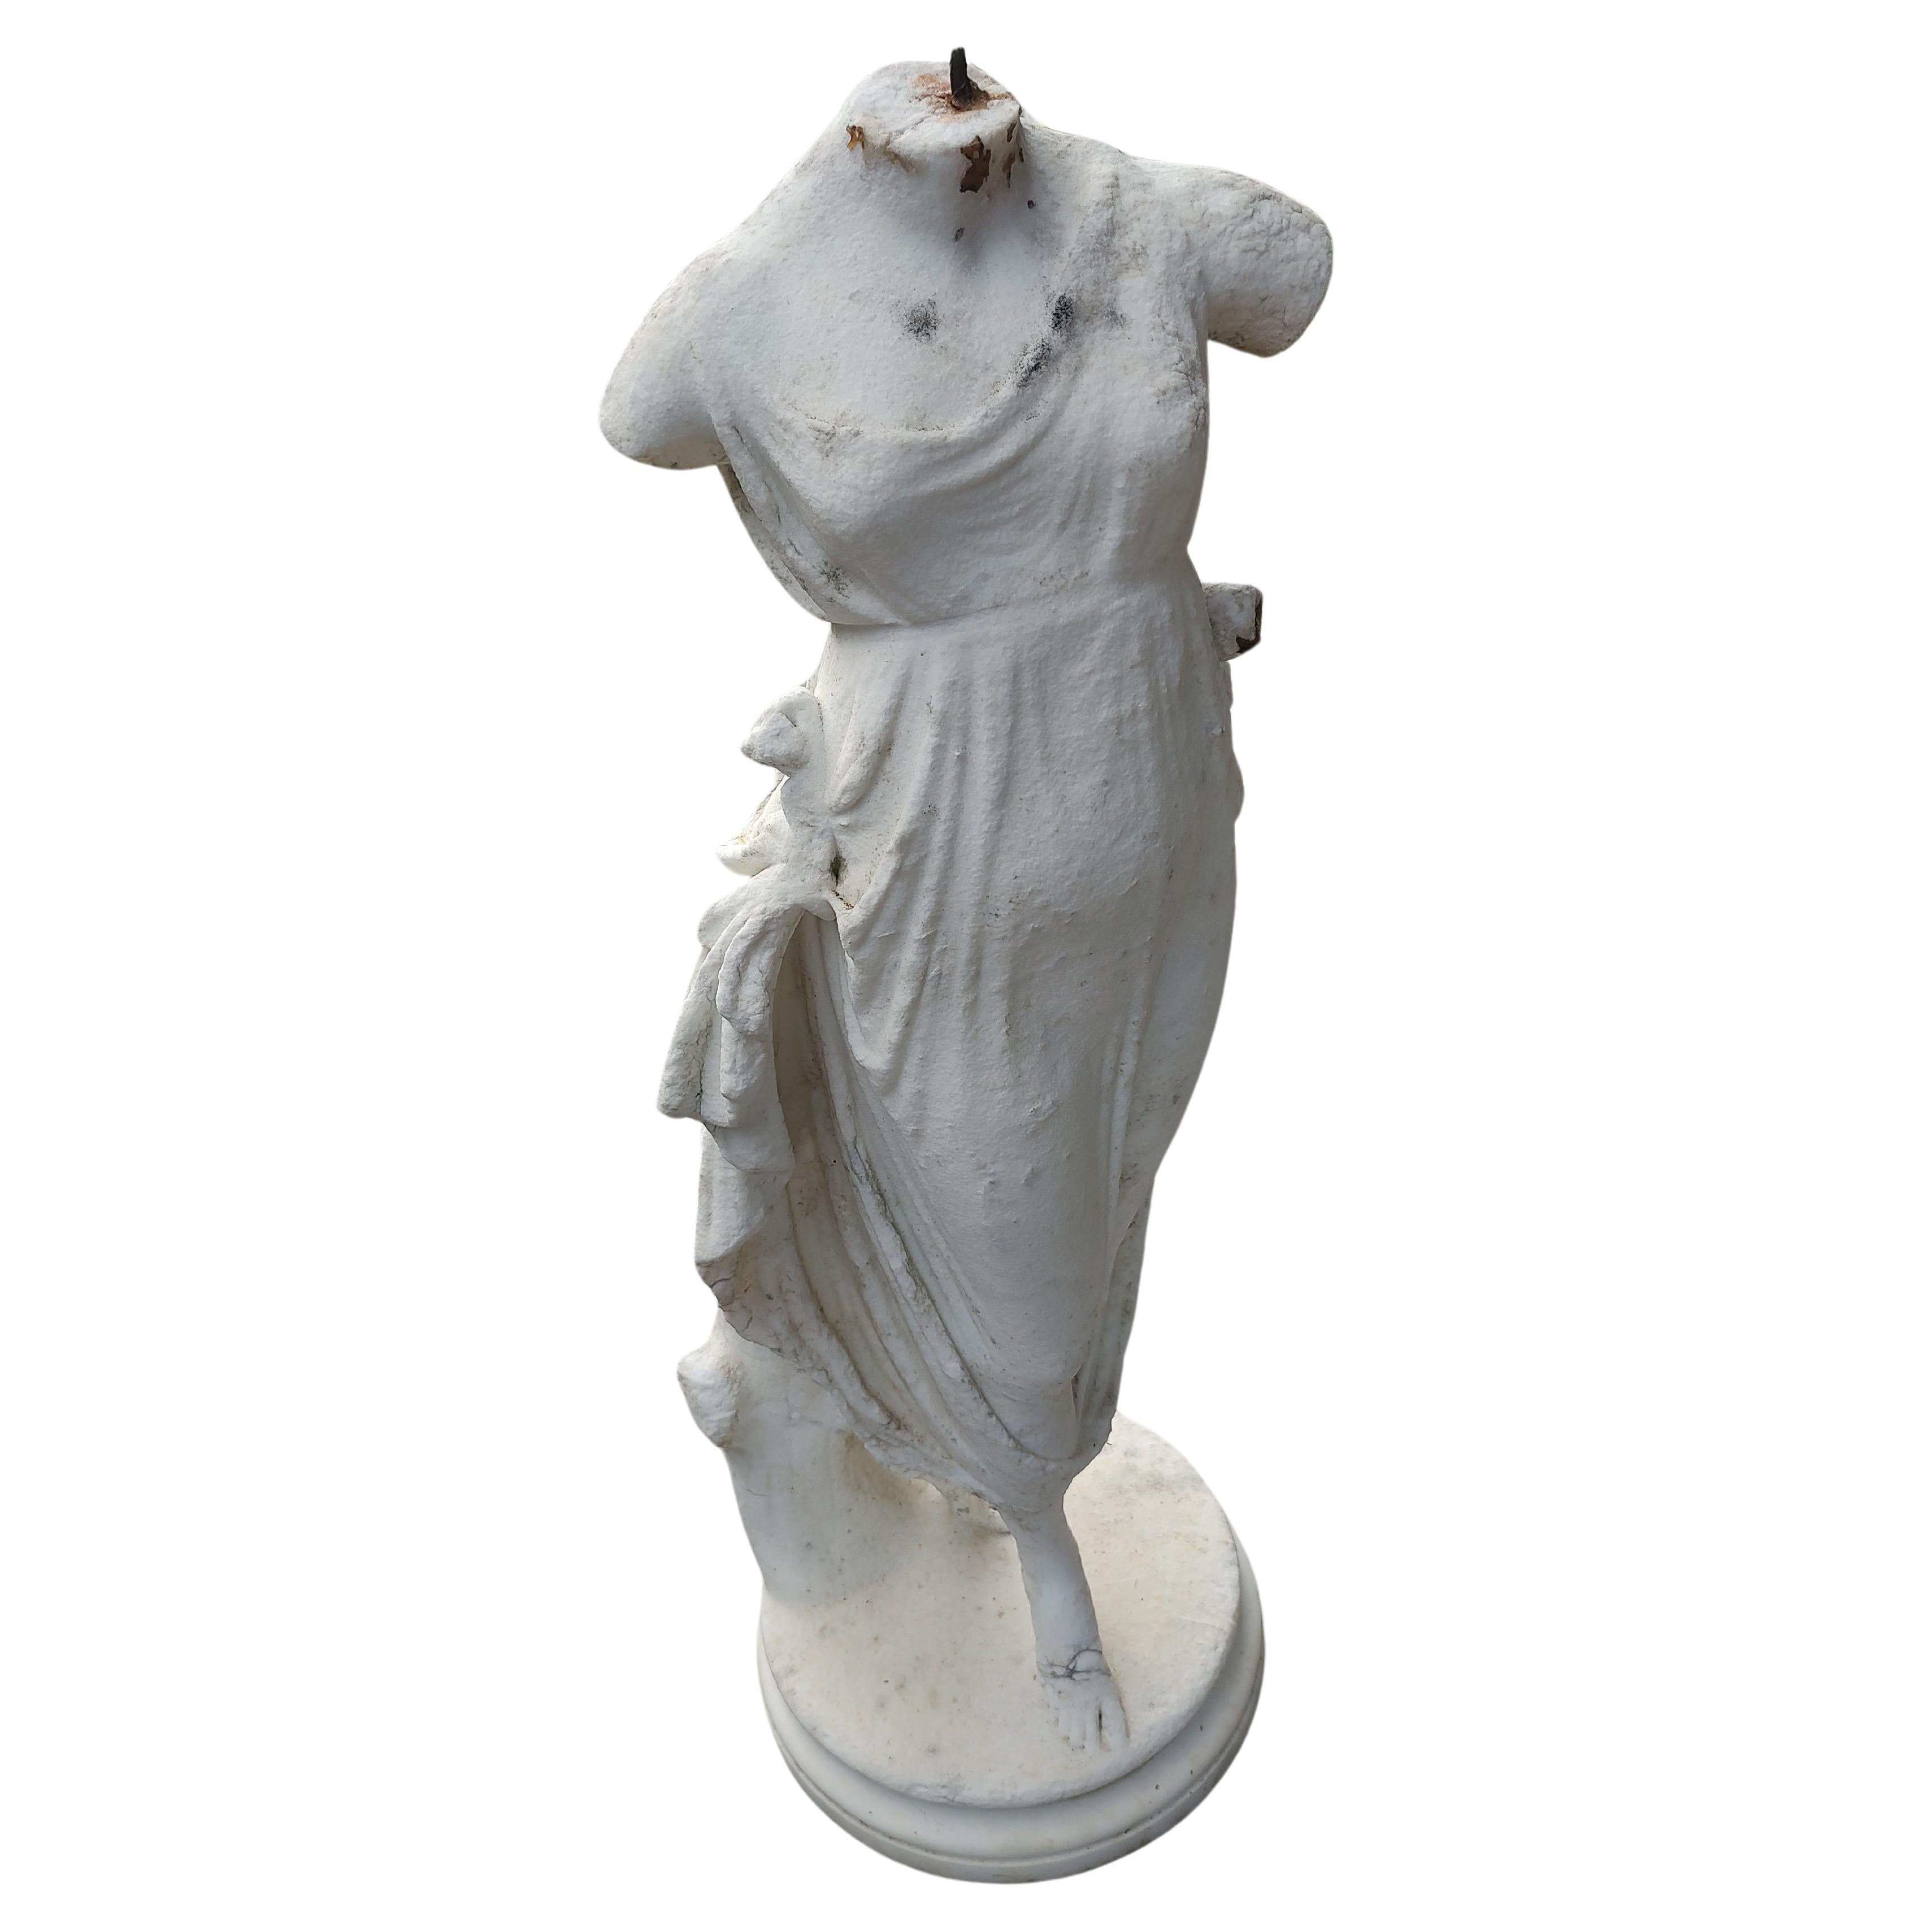 Fabulous clothed torso of a fair maiden from the victorian era
 Two pieces, has a plinth base which is separate from the figure. Well worn as it has lived it's life in a garden. Structurally sound.